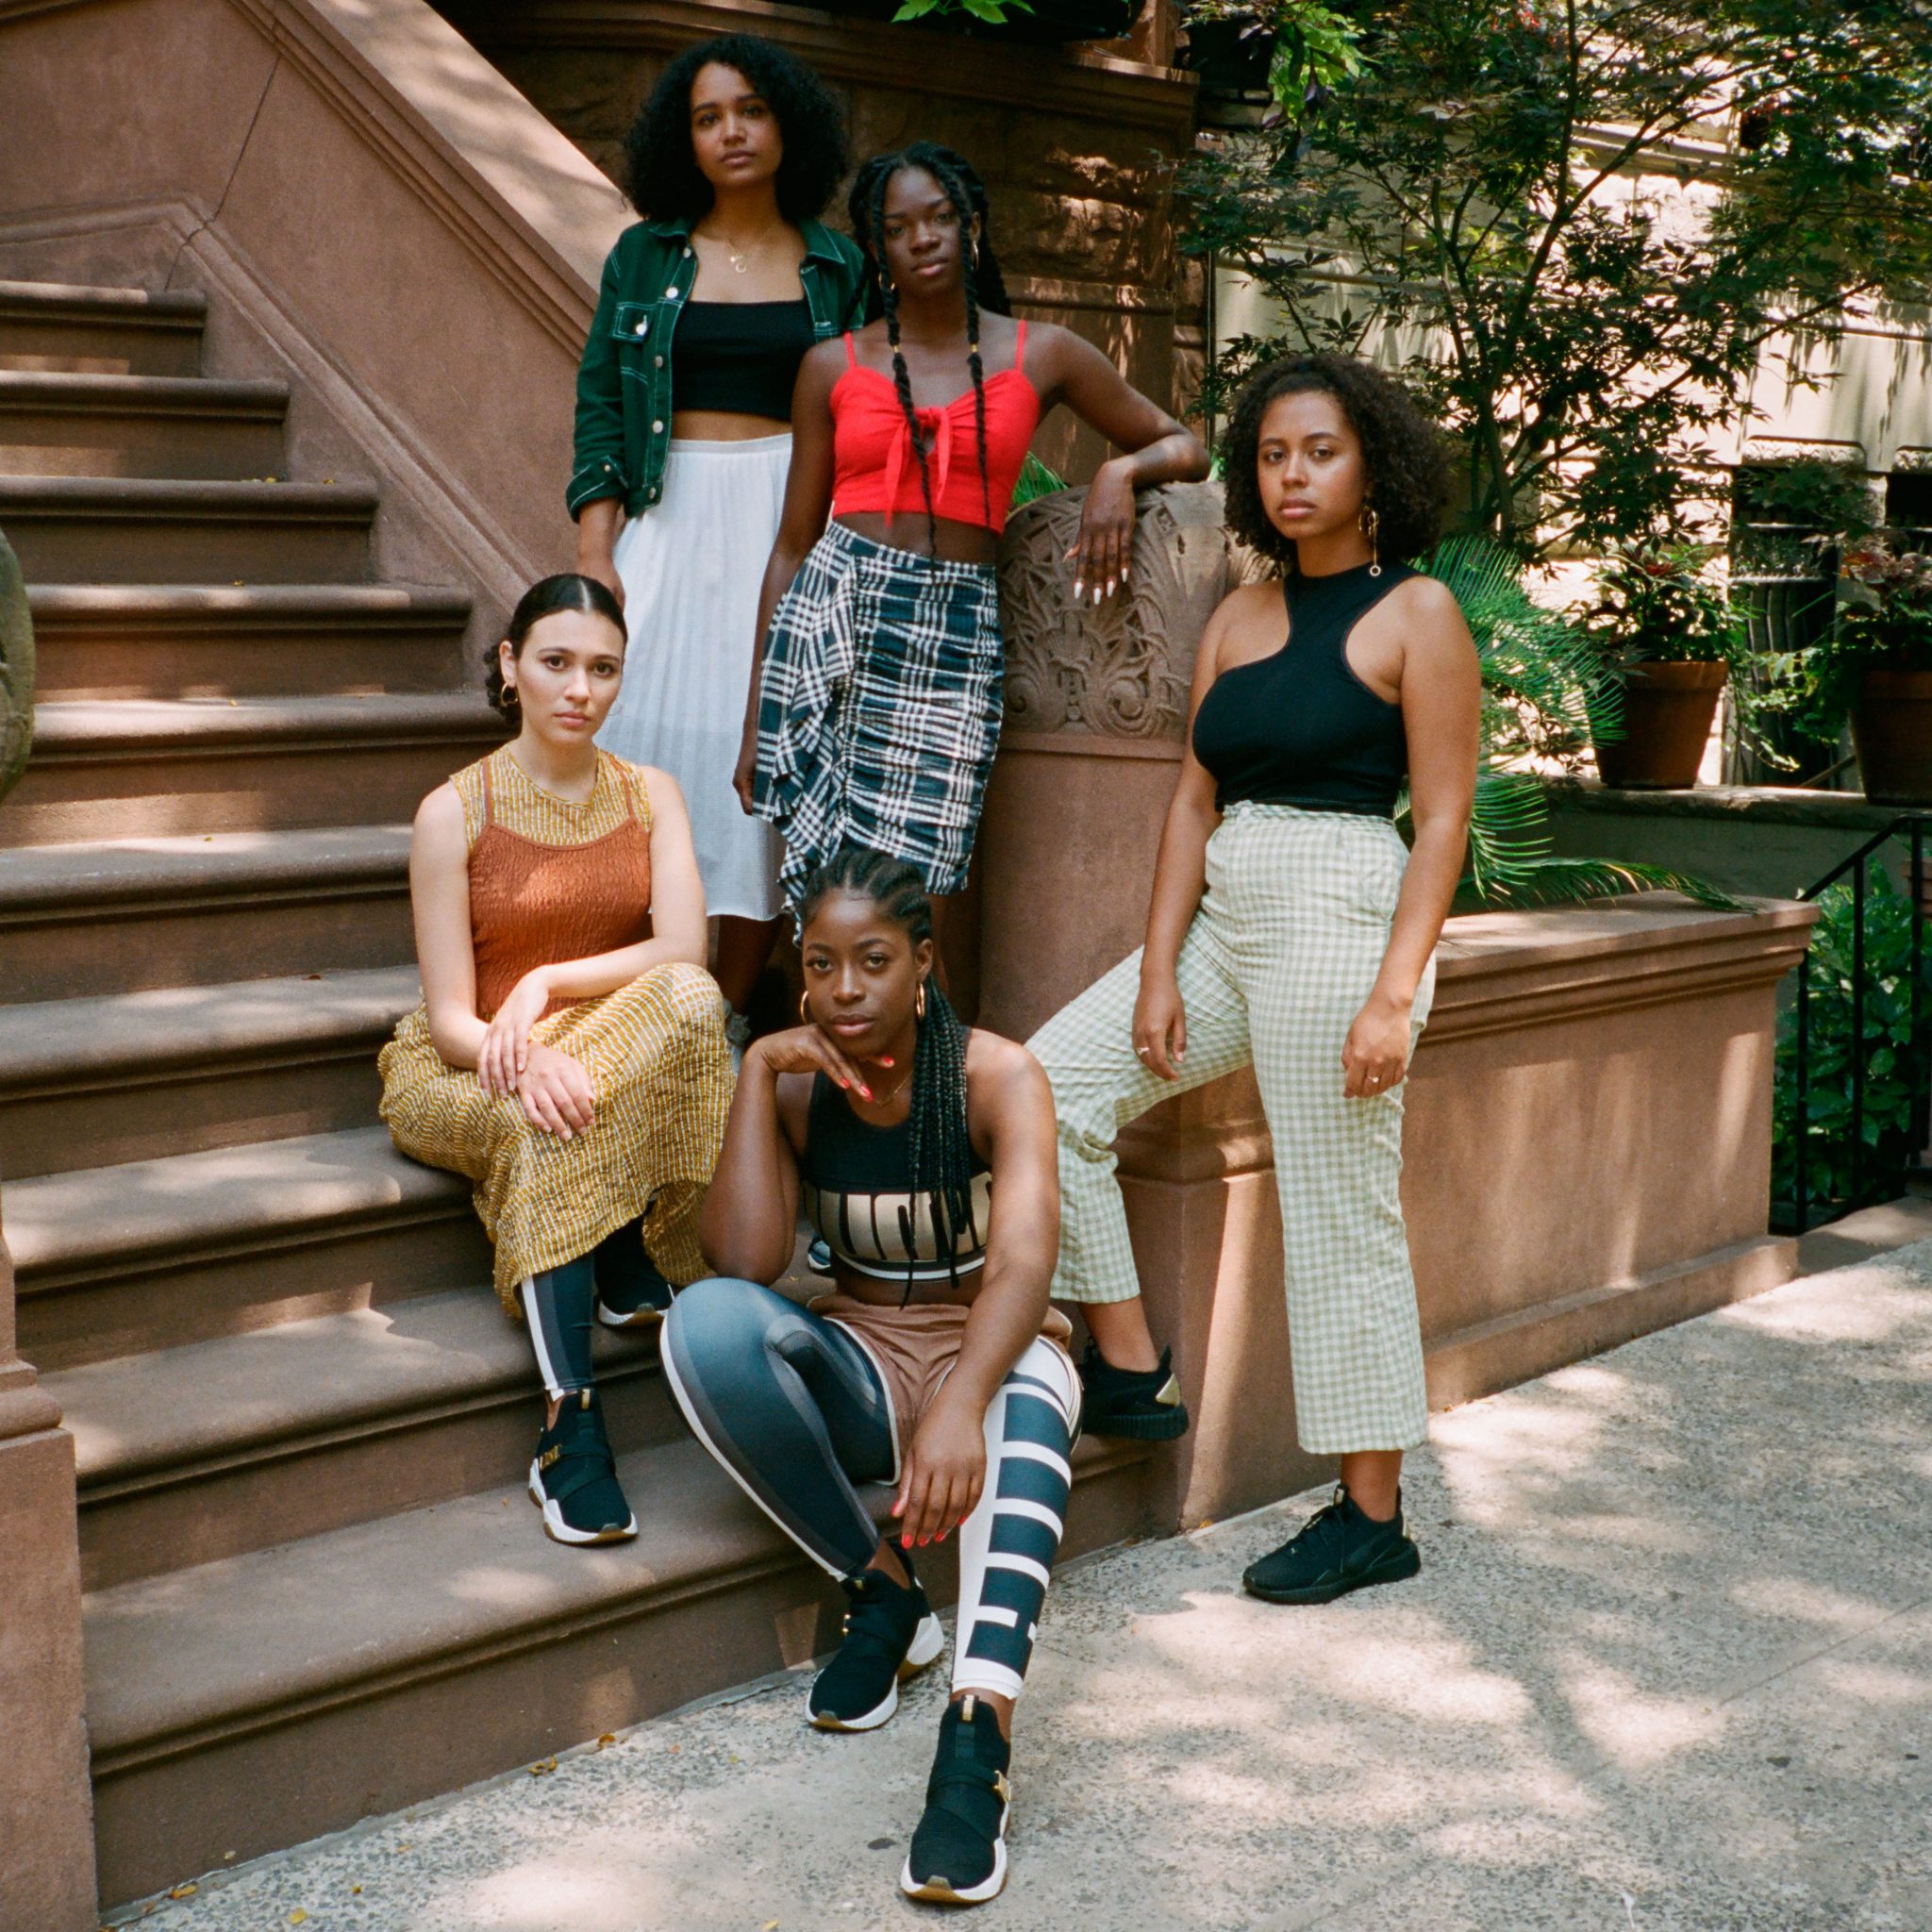 meet everystylishgirl, a collective creating diversity in the fashion industry